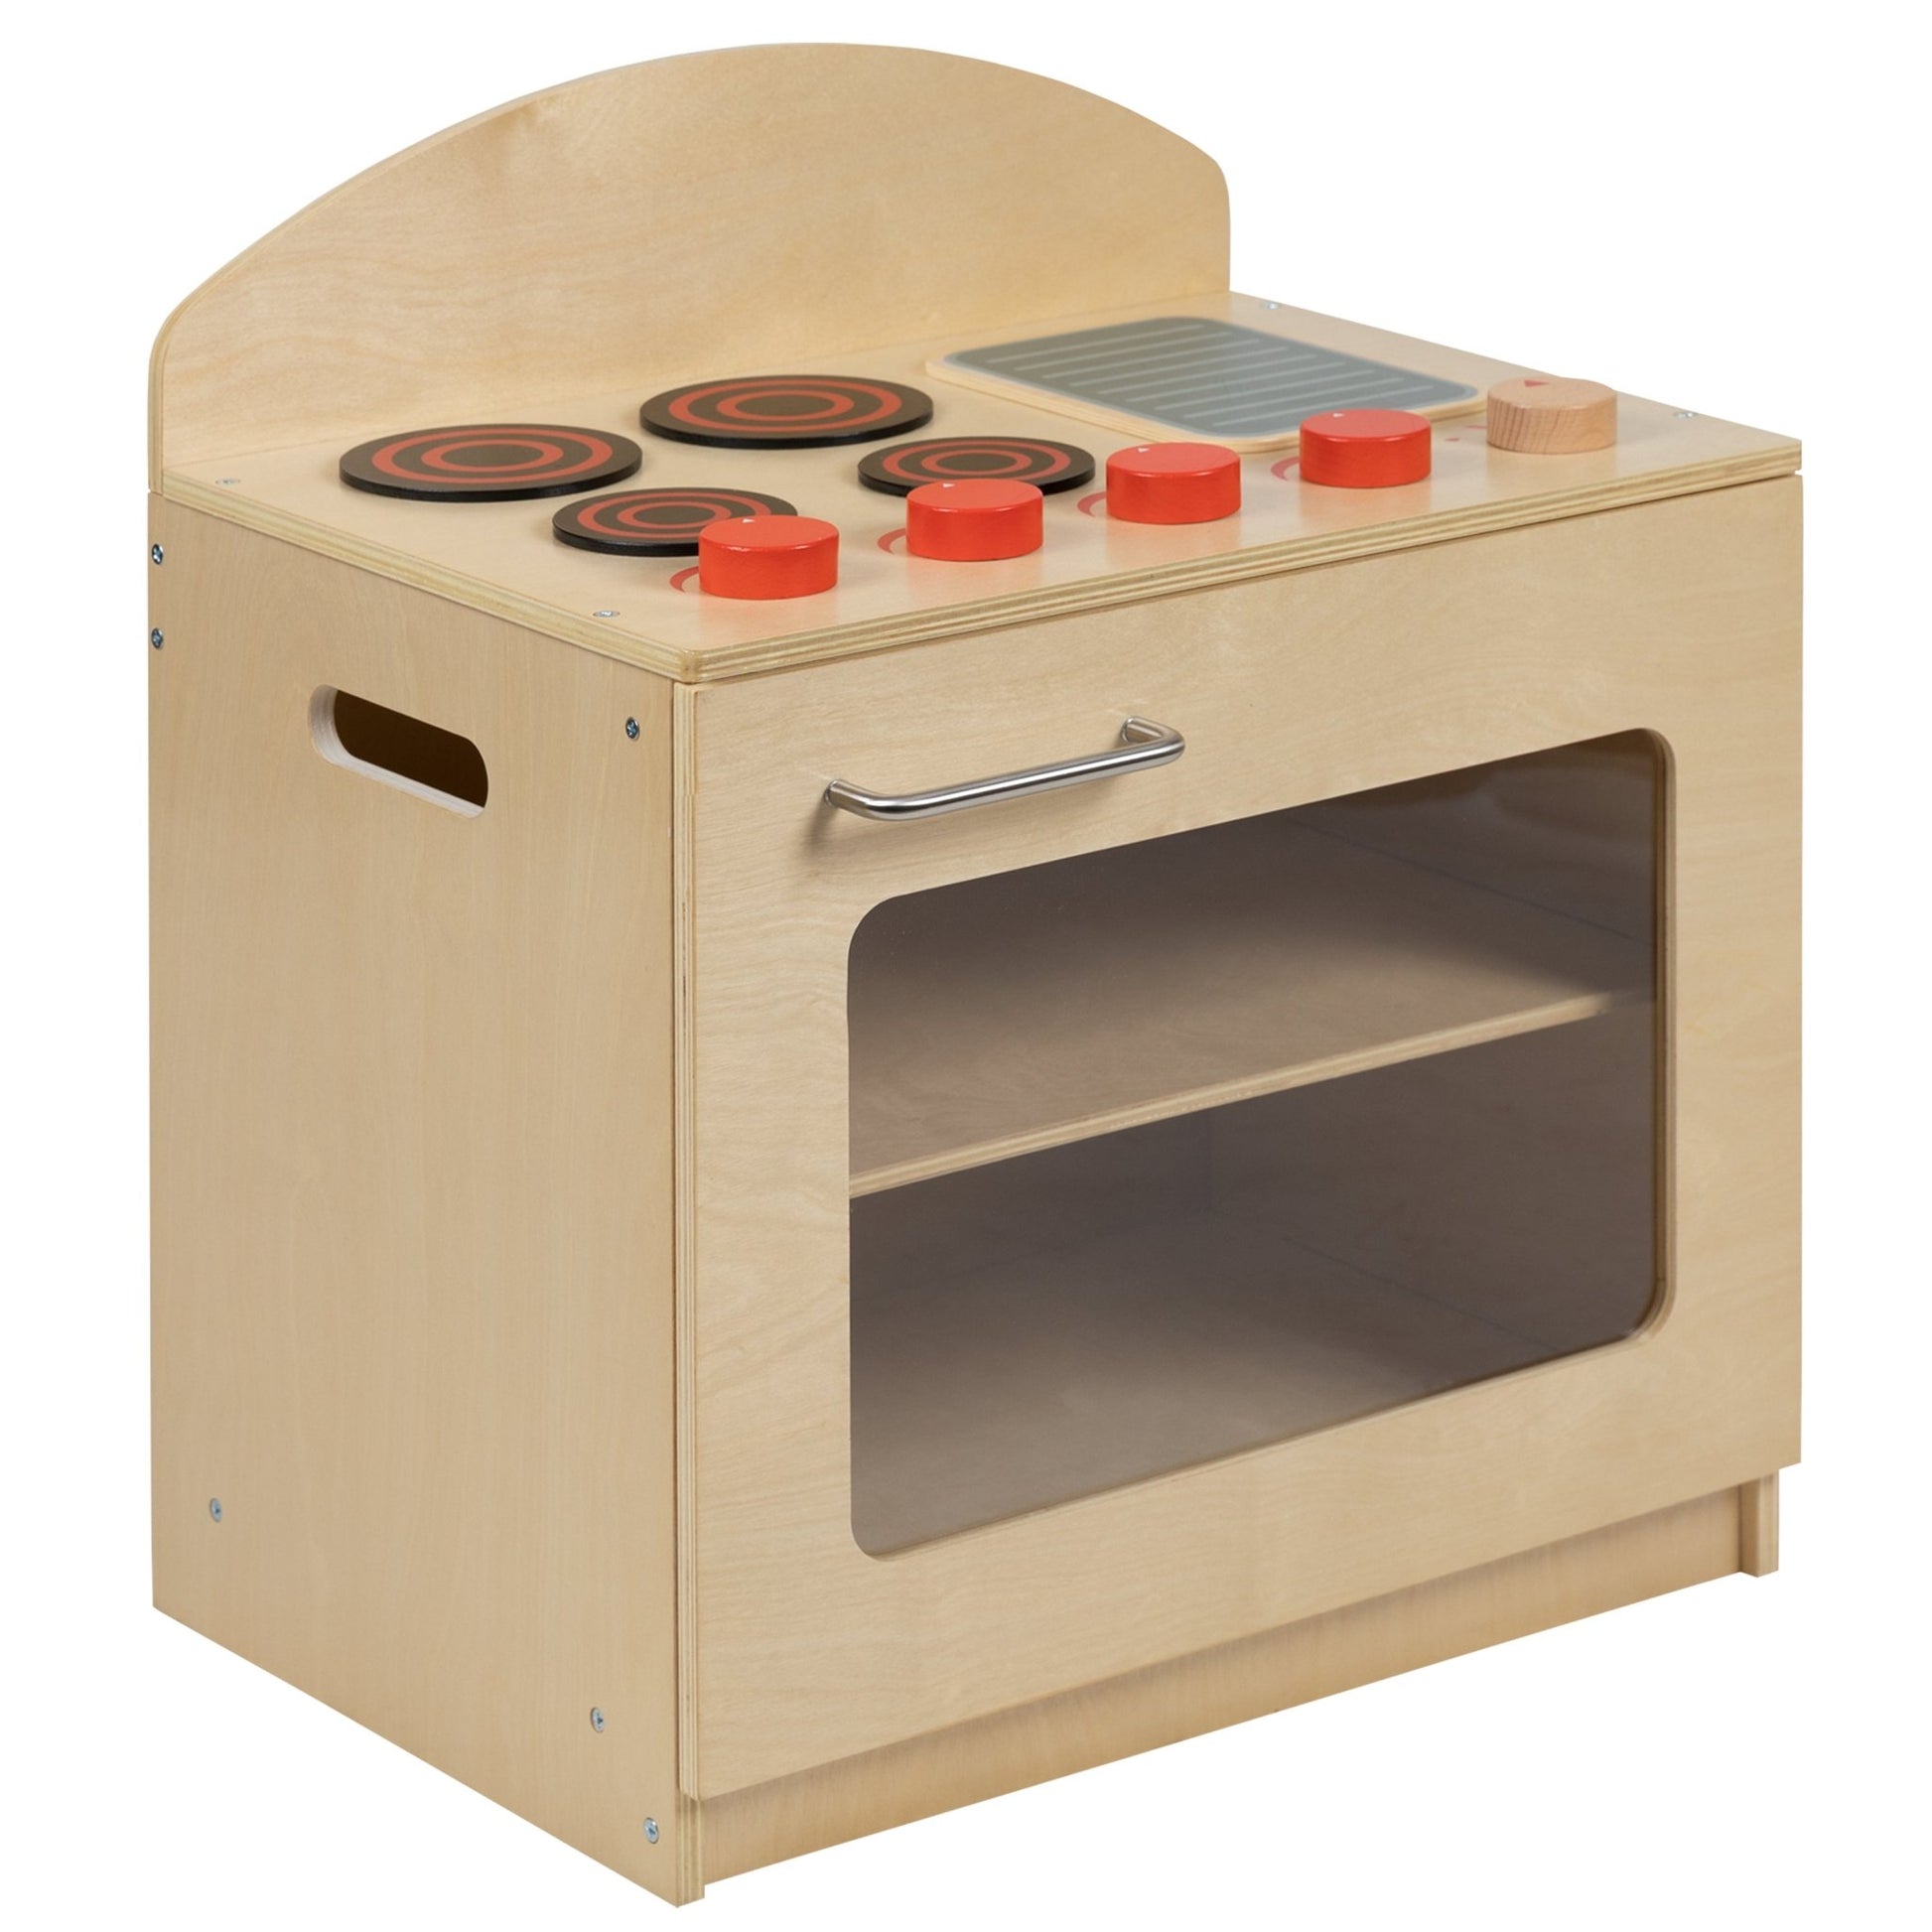 Hercules Children's Wooden Kitchen Stove for Commercial or Home Use - Safe, Kid Friendly Design - SchoolOutlet